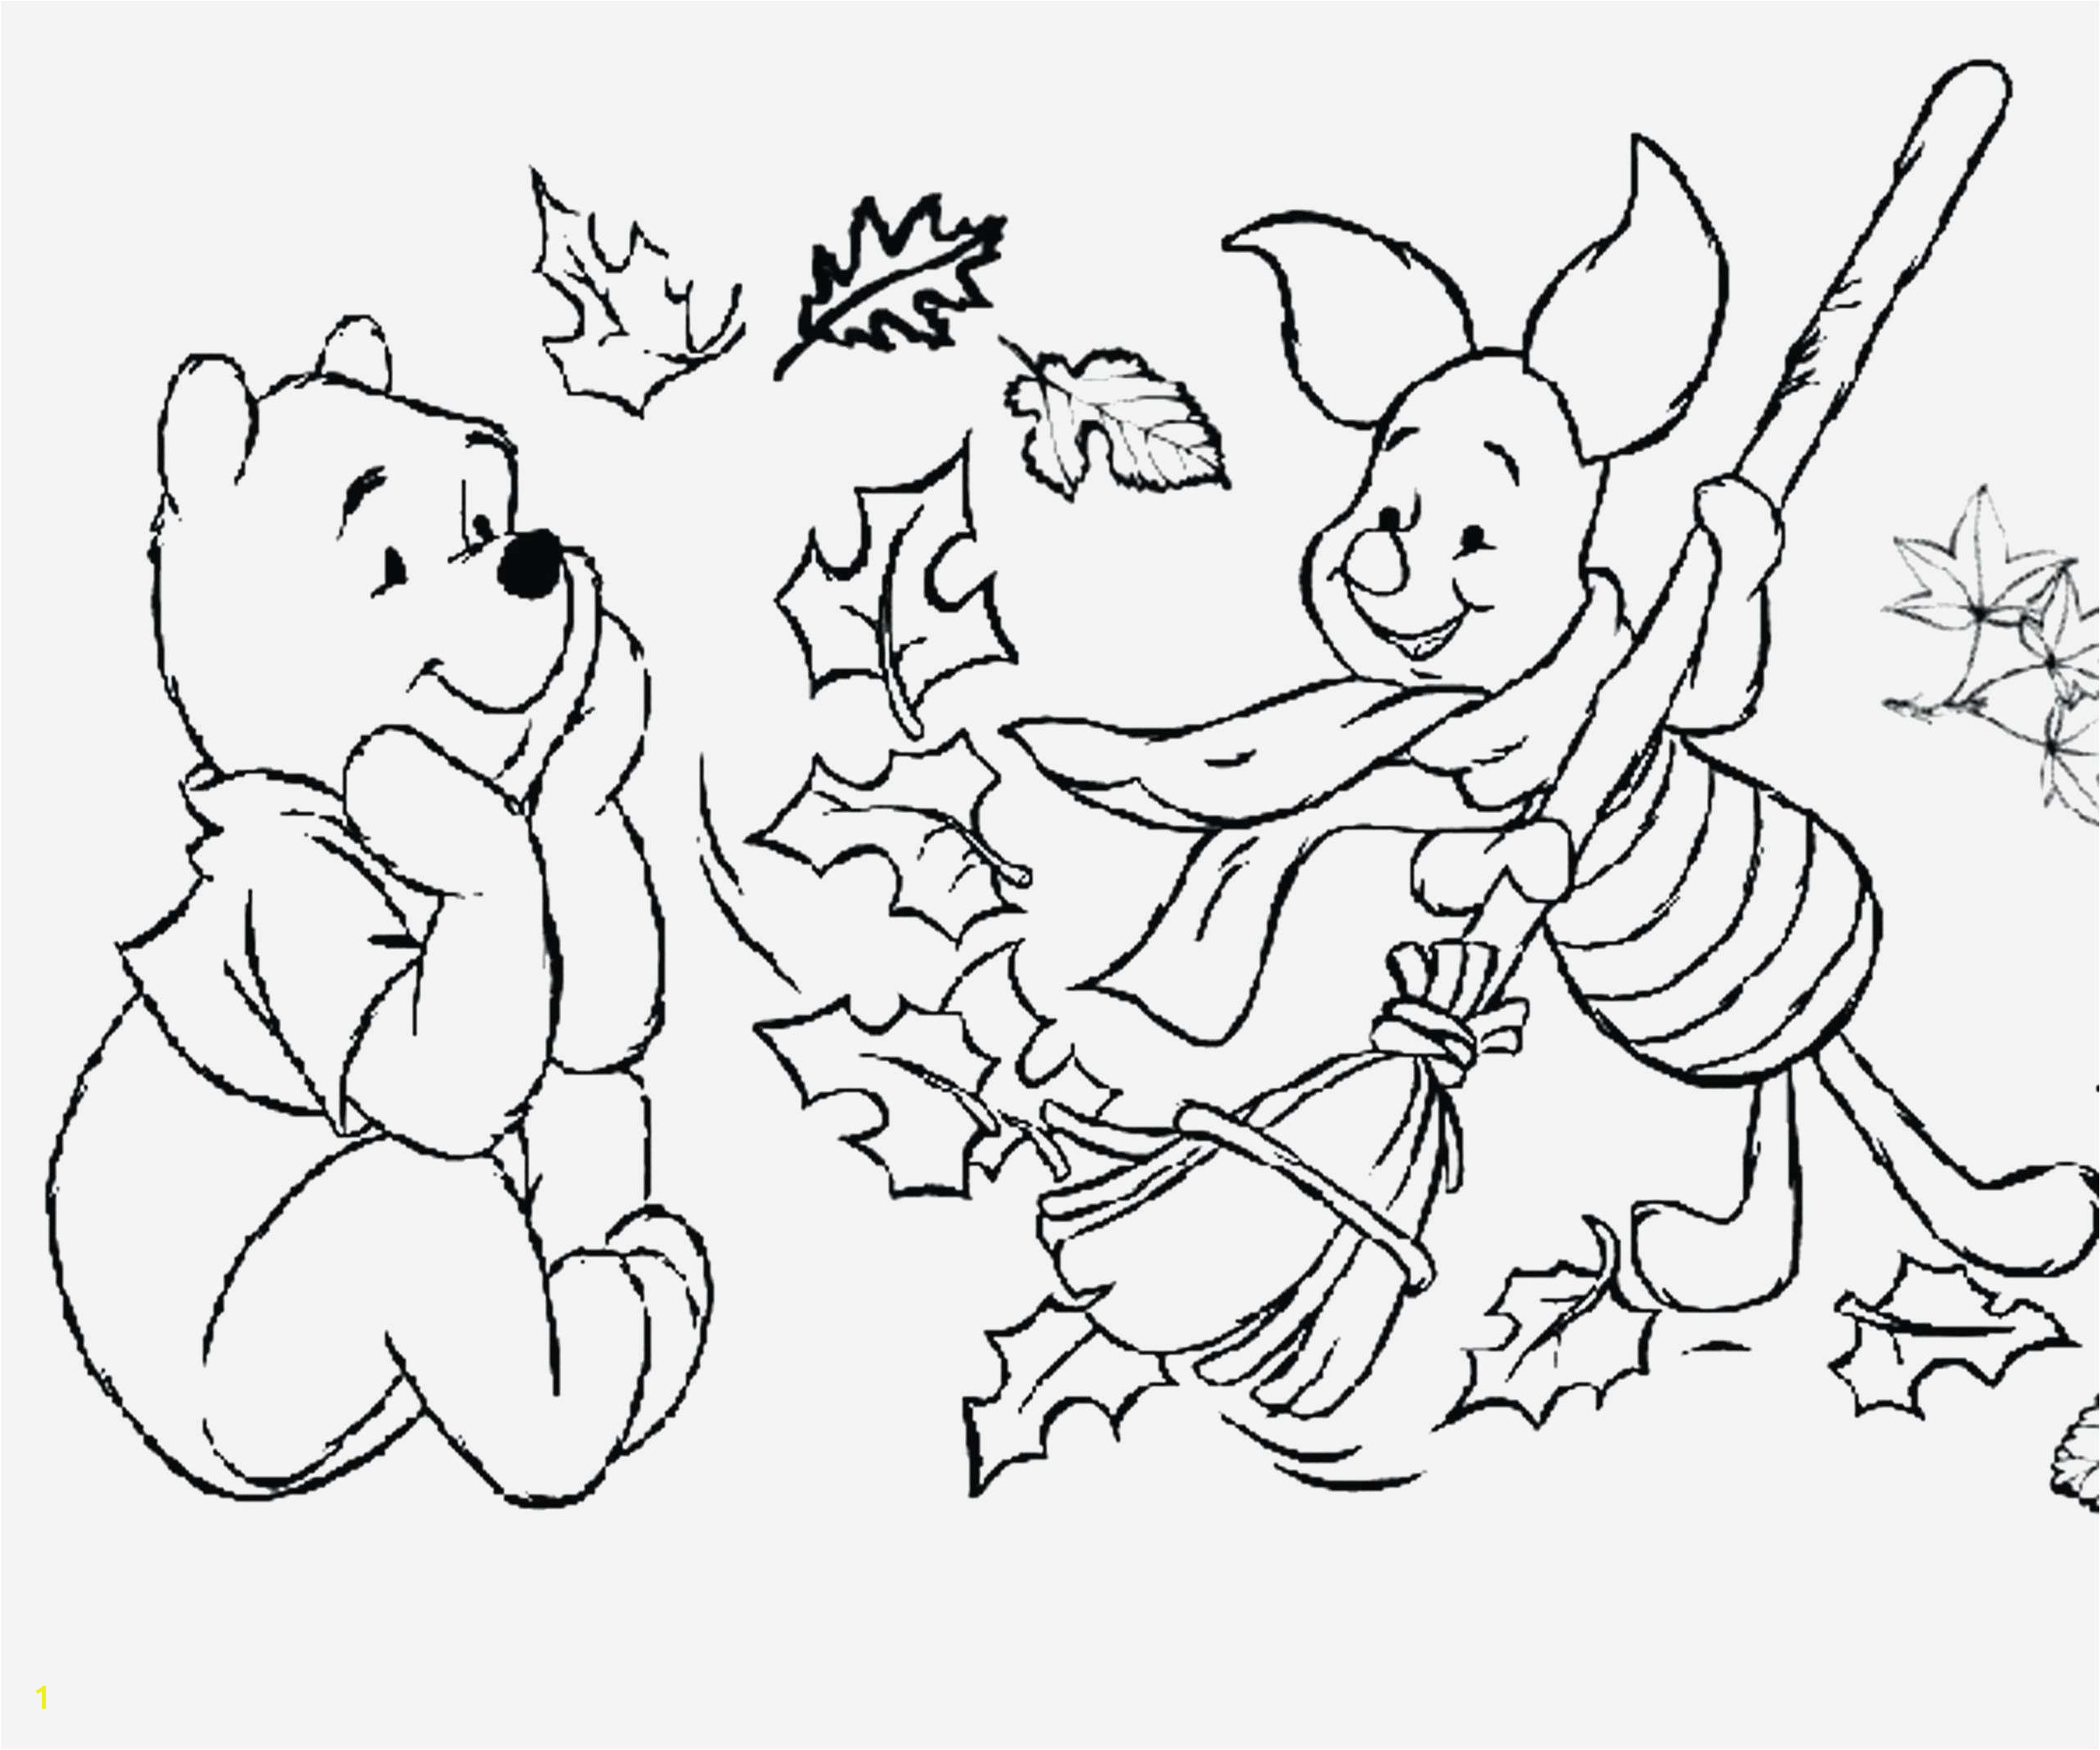 Burning Bush Coloring Page 24 Best S Caterpillars Coloring Page